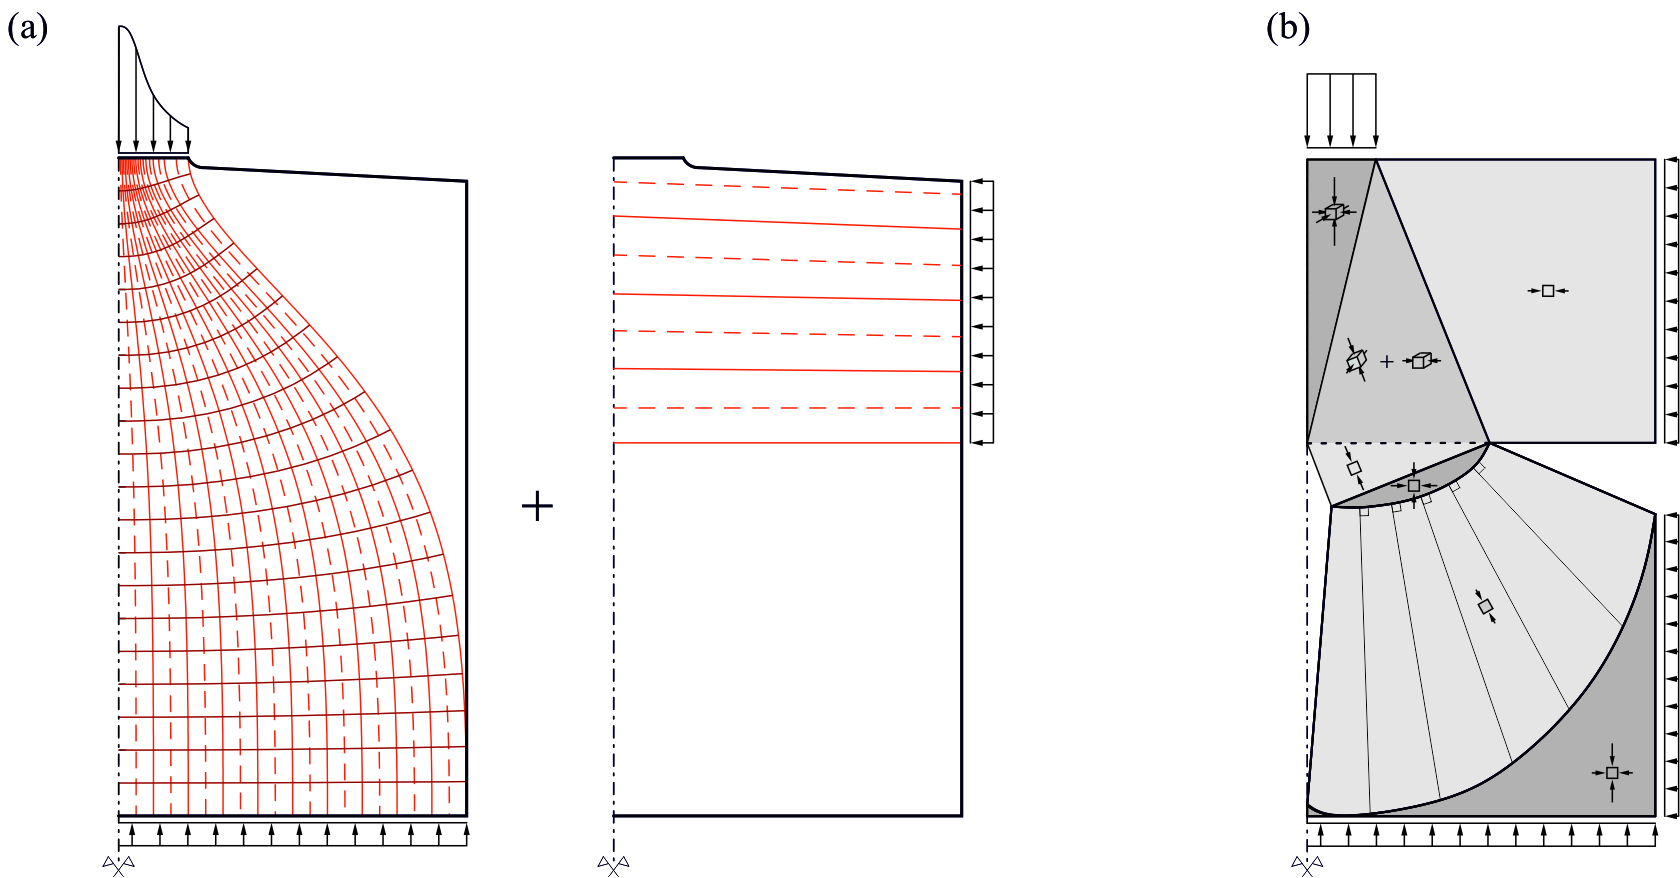 Enlarged view: Figure 2: Discontinuous stress field solutions for partially loaded reinforced concrete blocks (only half of the block is shown): (a) Bottle-shaped stress field [Markić and Kaufmann 2018 ], (b) Wedge-and-fan stress field [Markić et al. 2018 ].